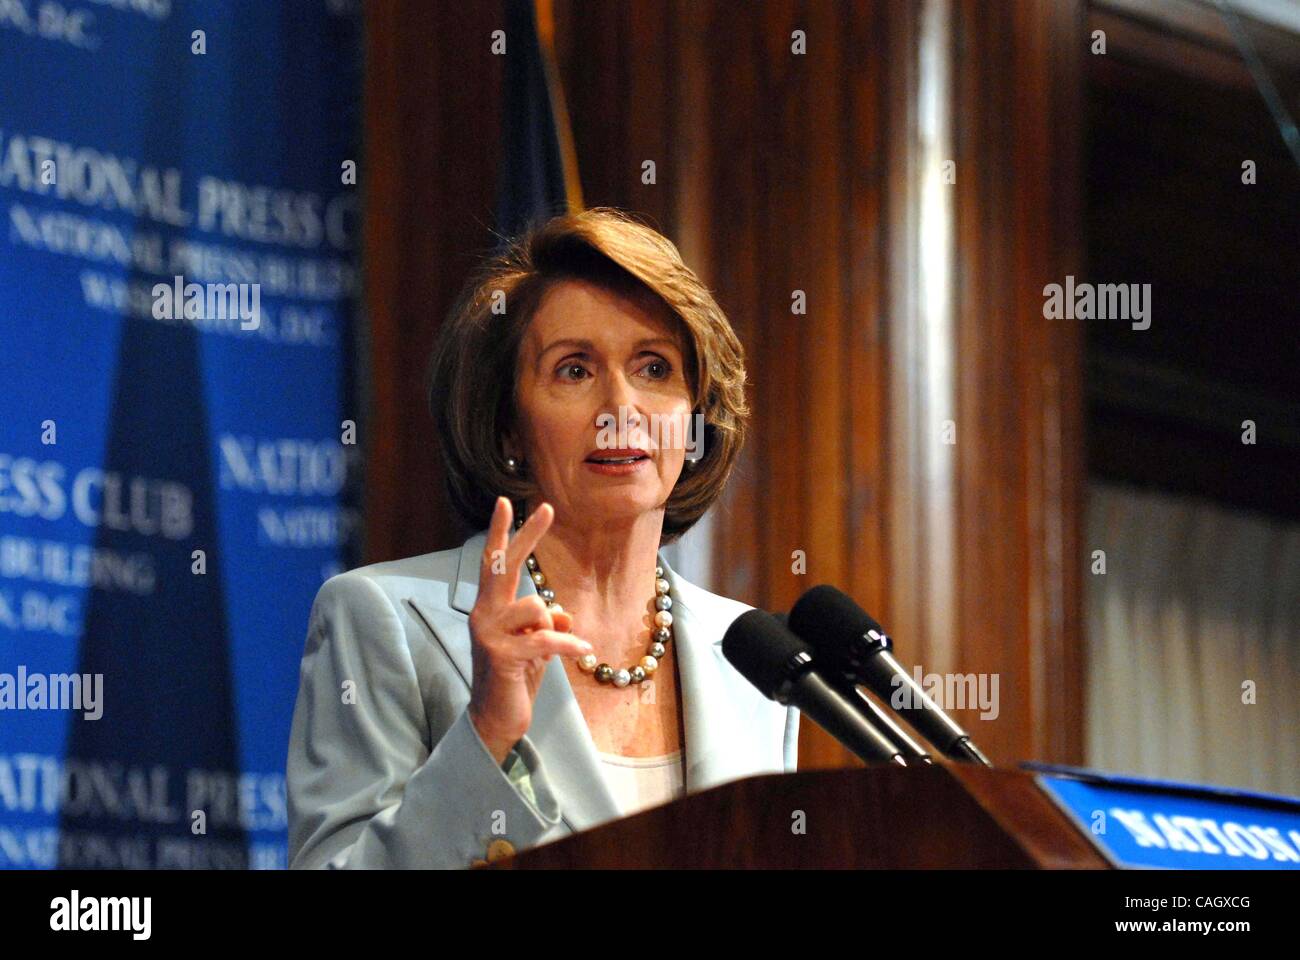 Jan. 25, 2008 - Washington, District of Columbia, U.S. - I12955CB.Speaker of the House Nancy Pelosi and Congressman Harry Reid speak to journalists about their views of the State of the Union prior to President Bush delivering his final State of the Union address. Washington, D.C. 01-25-2008(Credit  Stock Photo